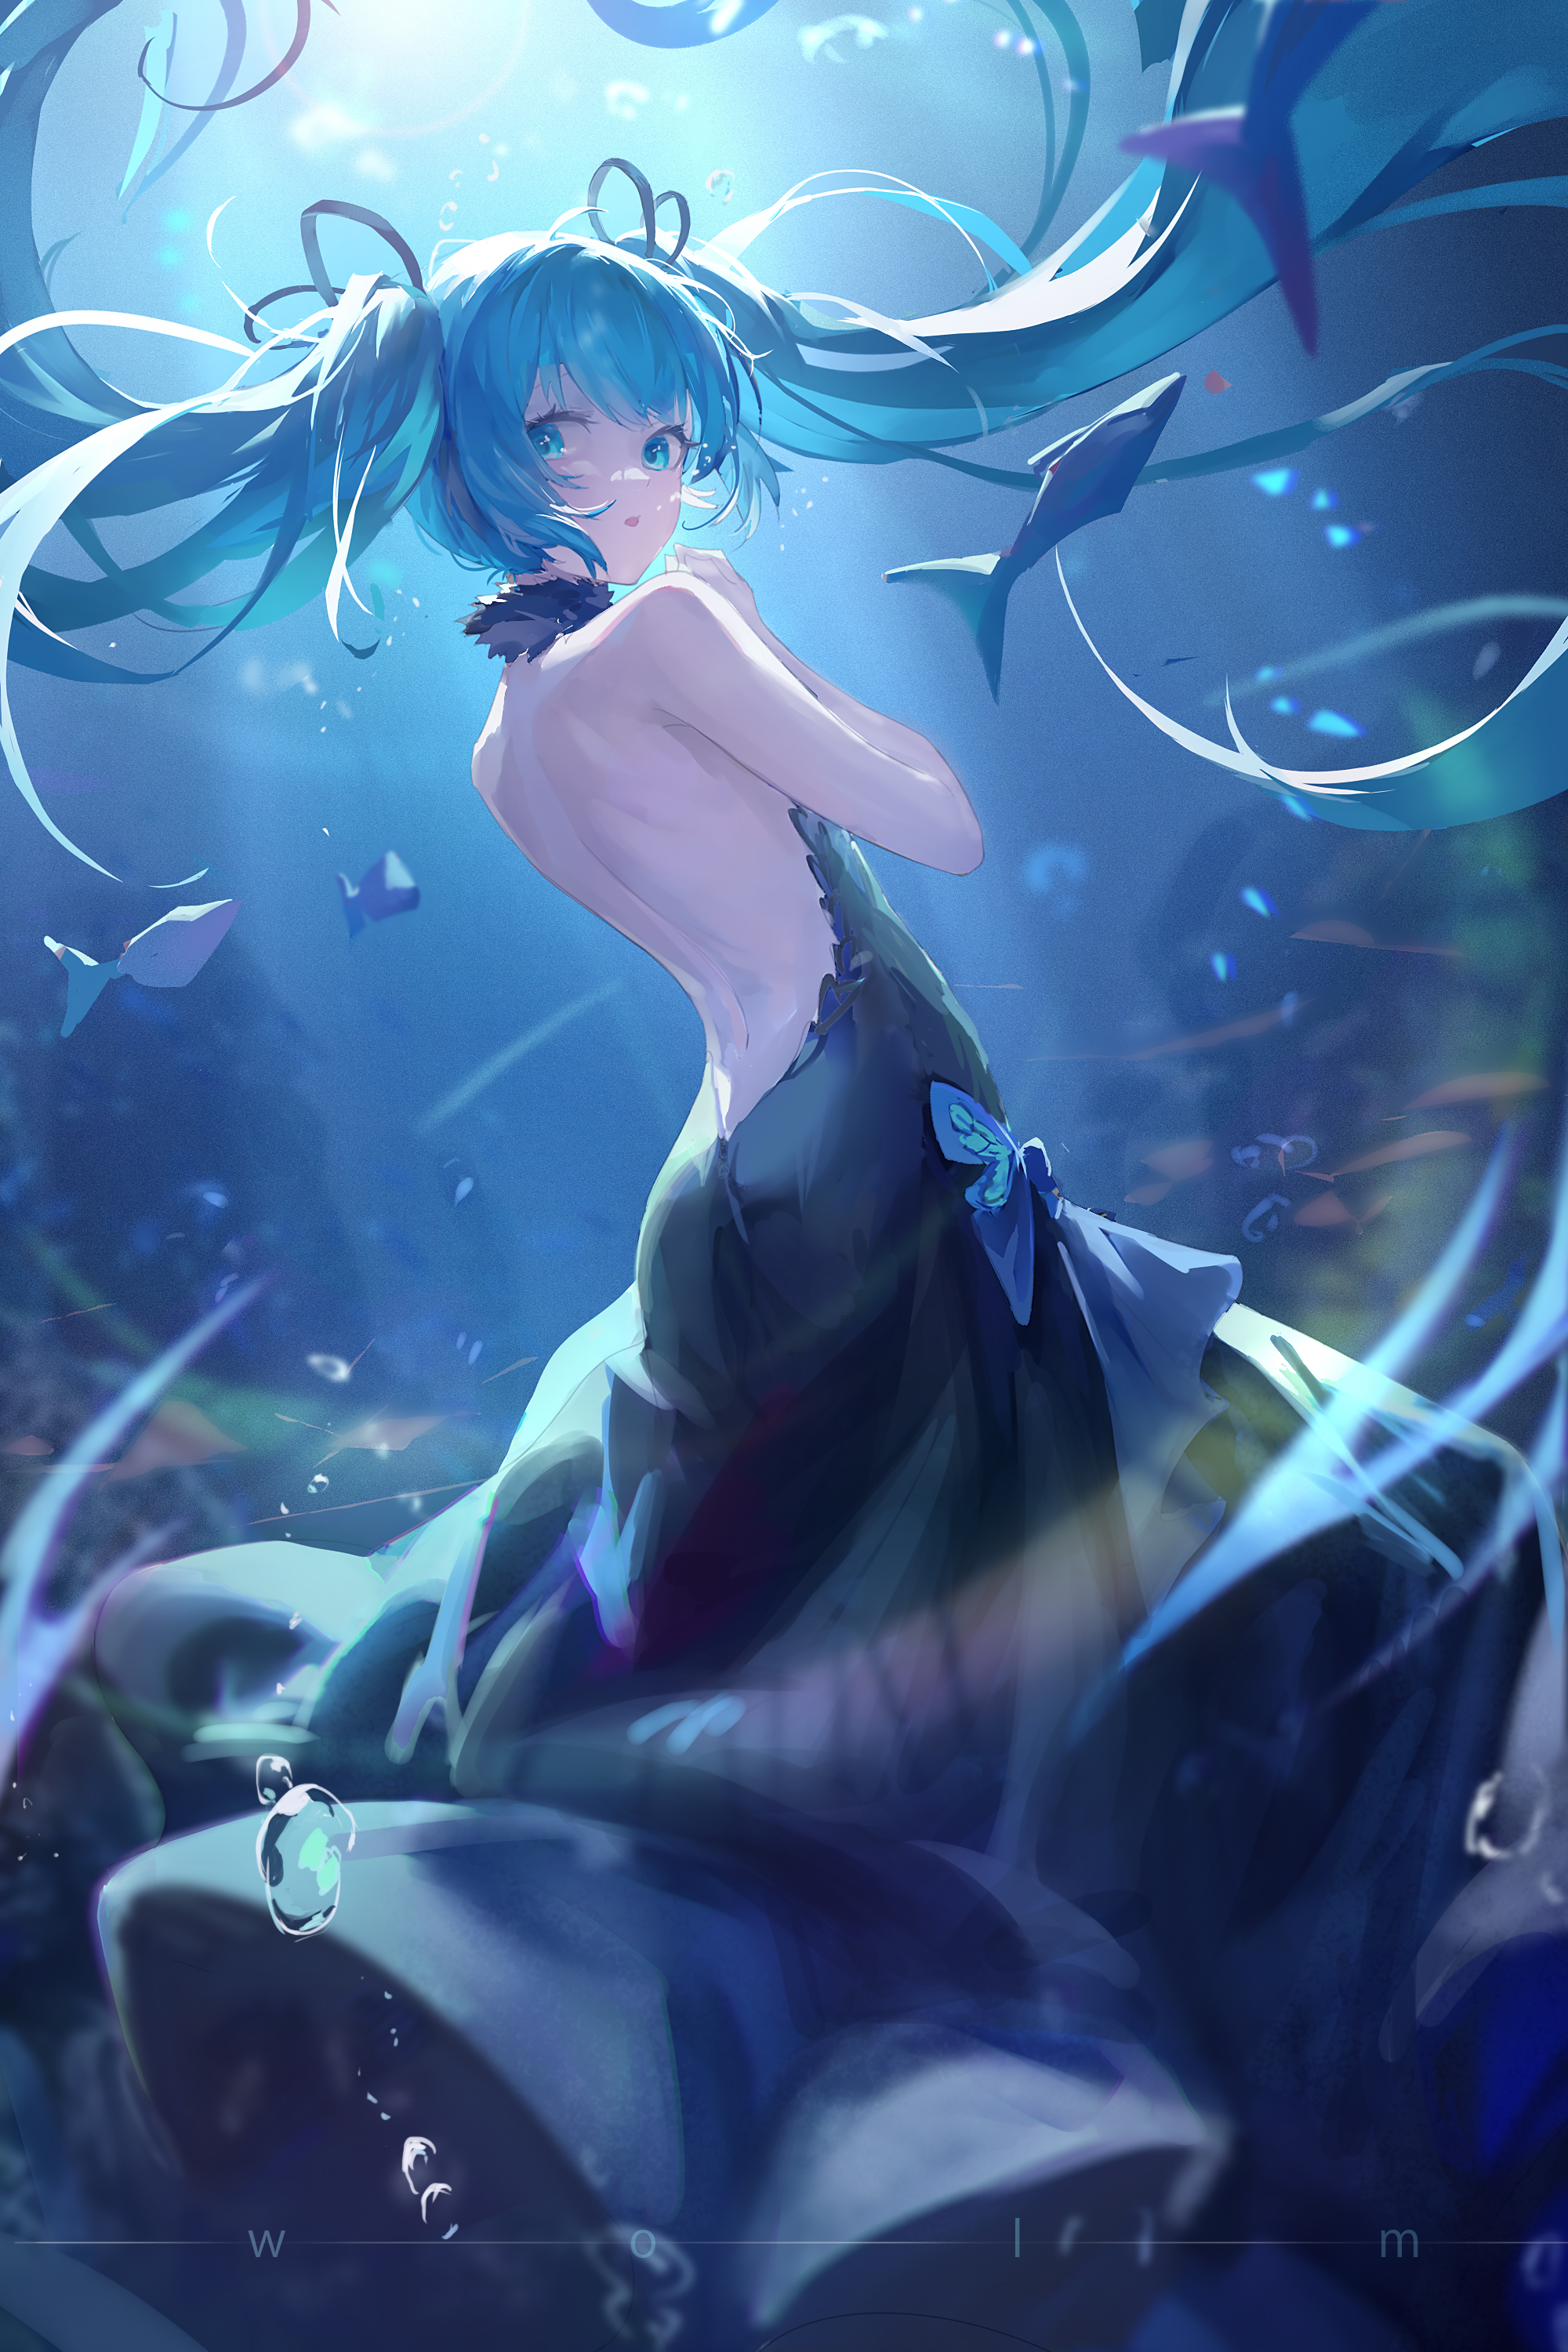 Anime 2000x3000 anime anime girls Hatsune Miku Vocaloid twintails bareback blue hair blue eyes long hair portrait display fish underwater bubbles water in water looking at viewer sunlight dress looking back animals